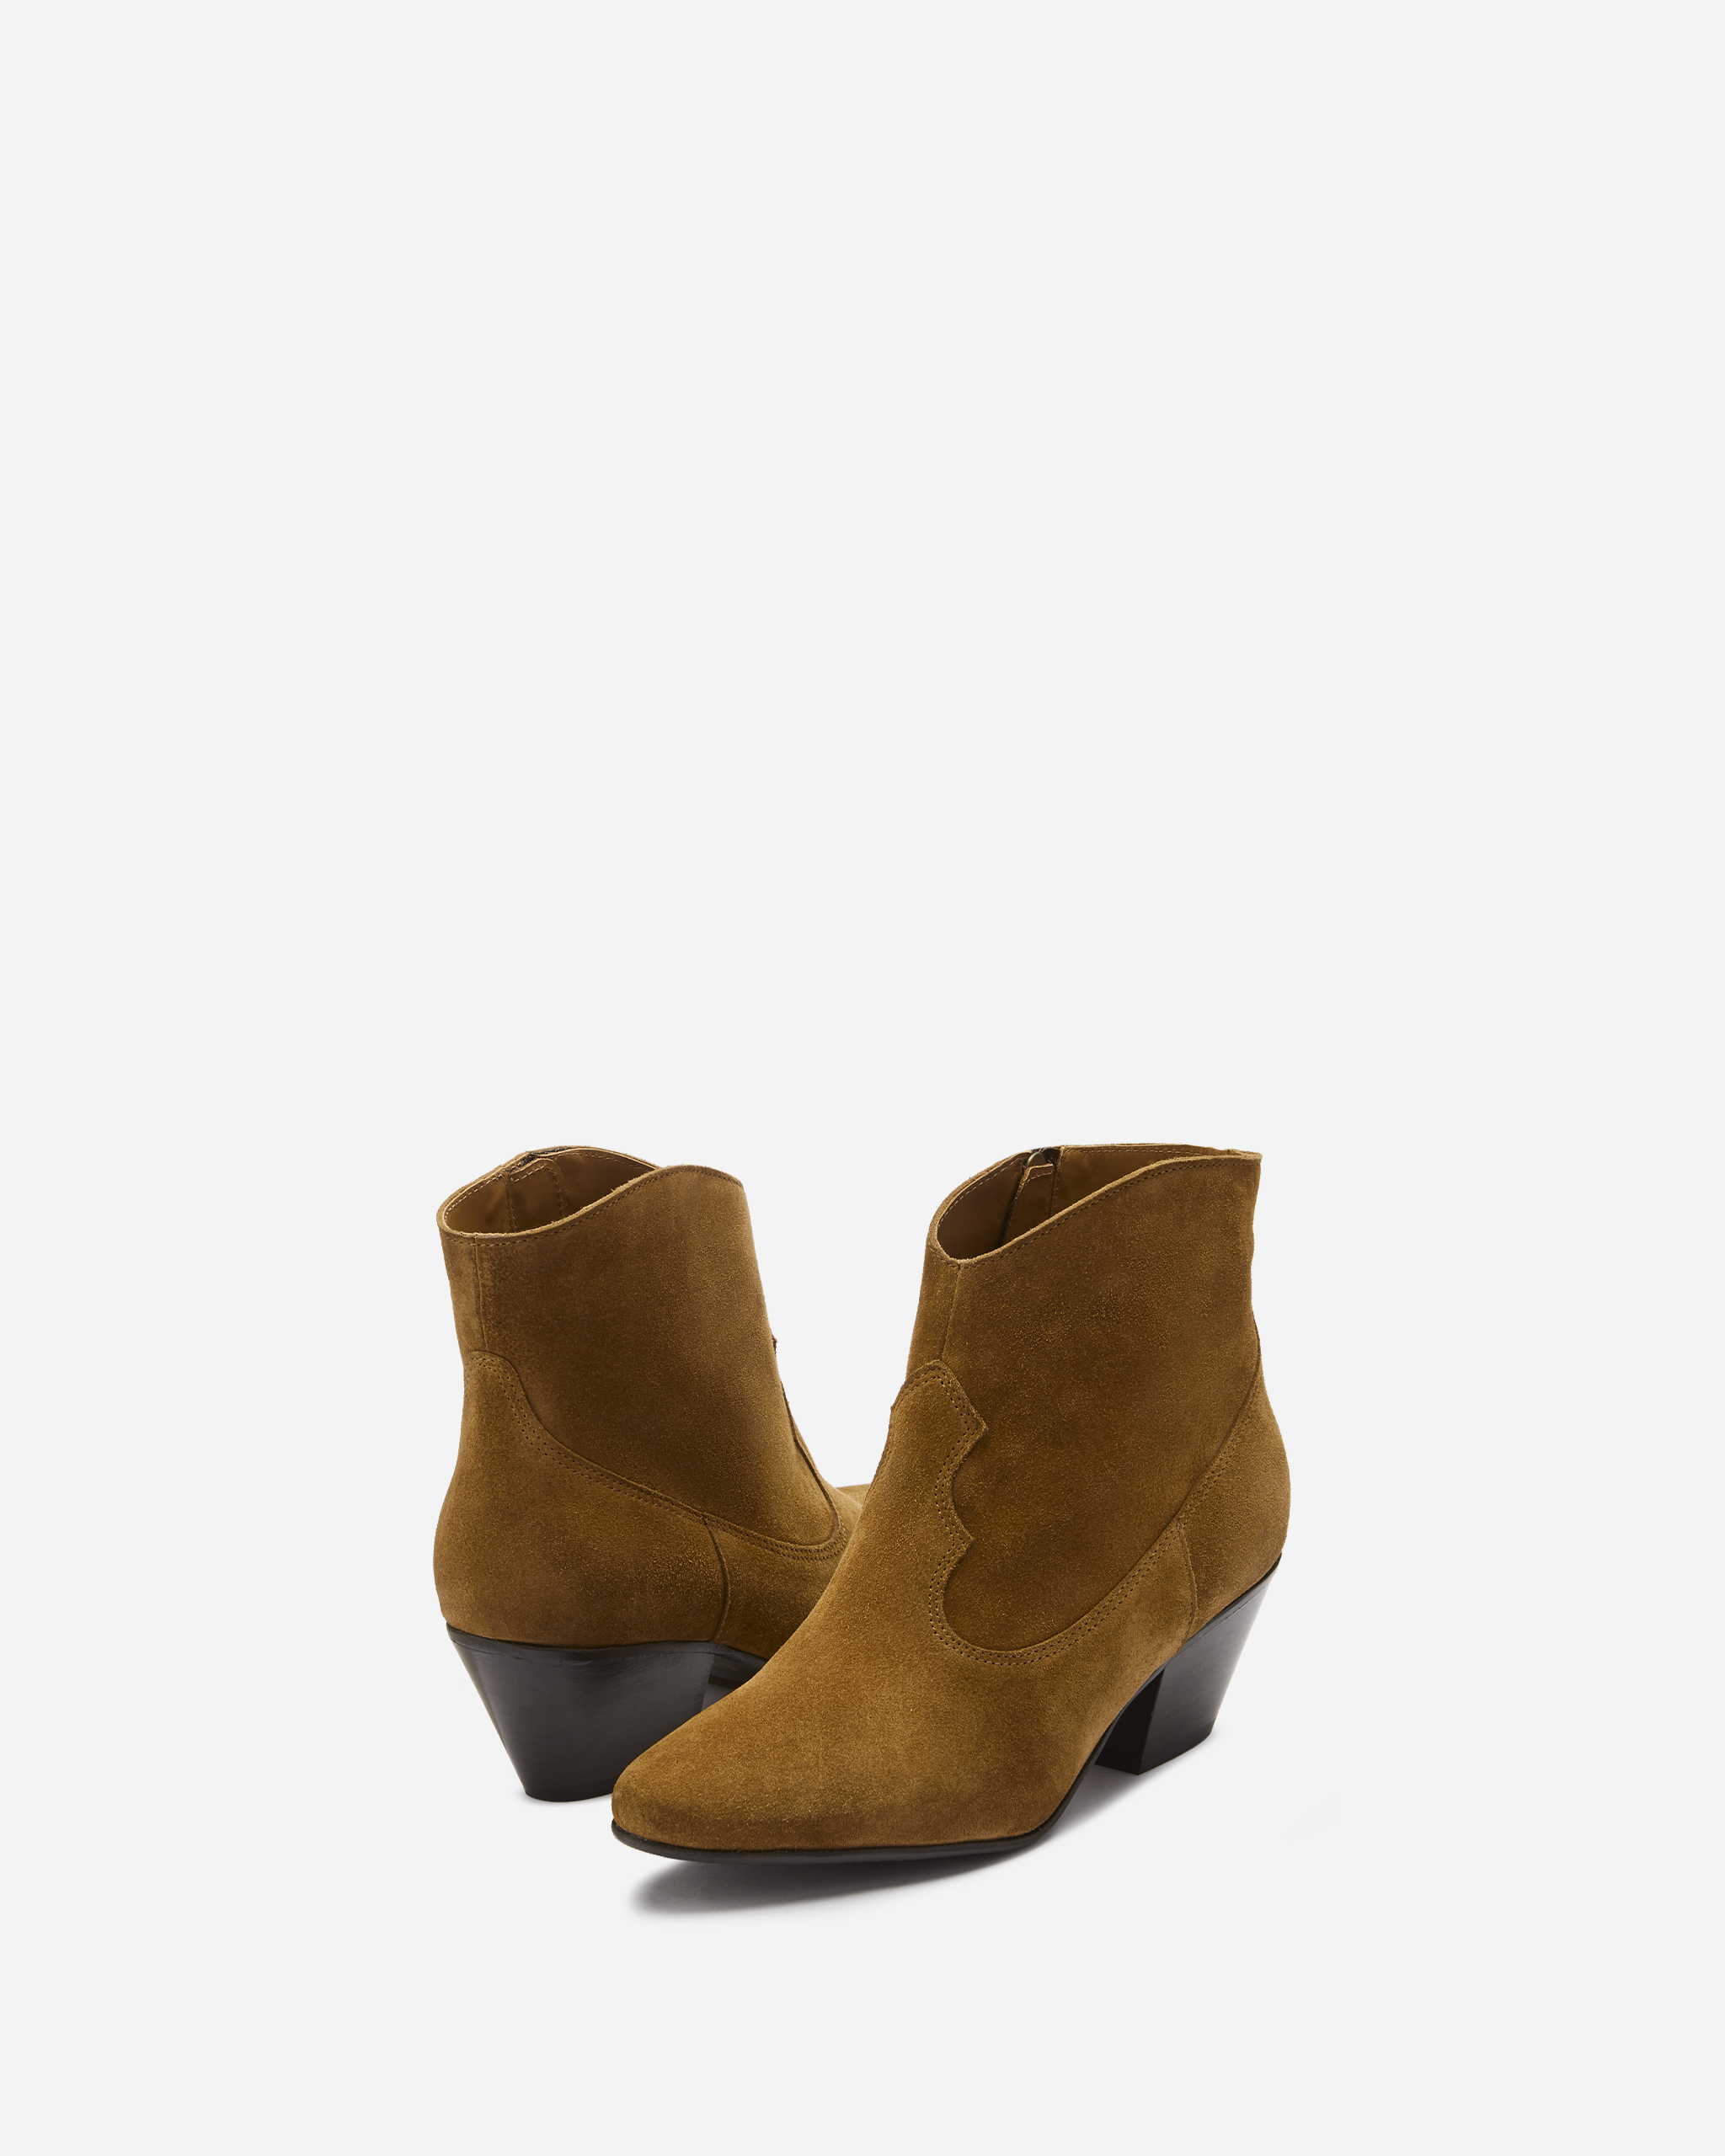 cowboy western style tan suede heeled ankle boot